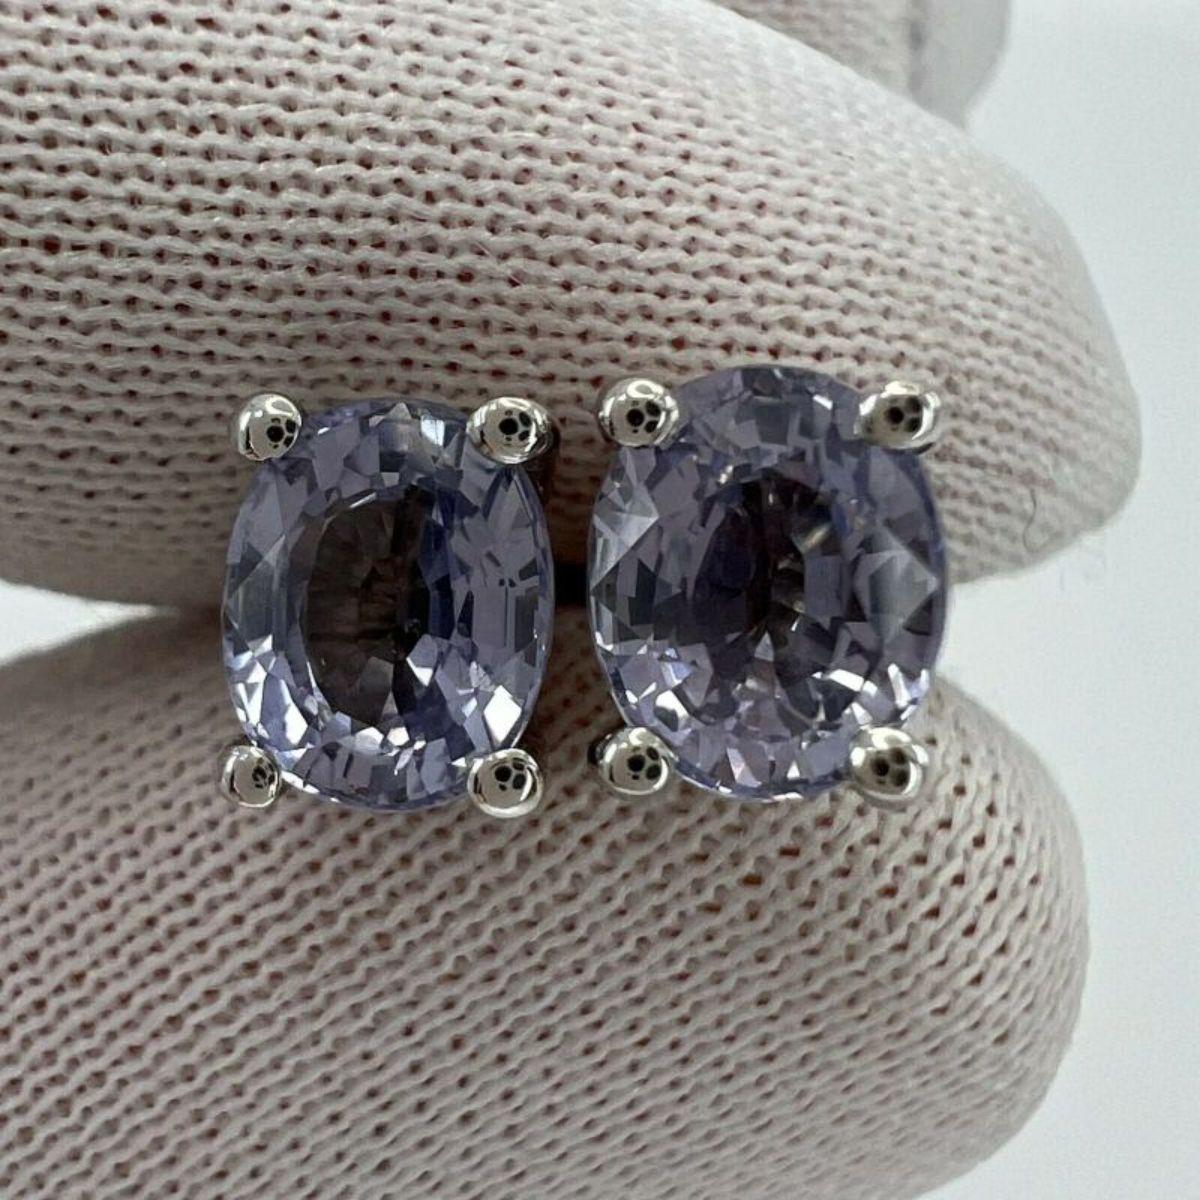 2.05ct Natural Sapphire Purple Violet 18K White Gold Oval Cut Earring Studs

Fine Pink Purple Sapphire 18k White Gold Oval Cut Earring Studs. 
Stunning natural 6x5mm vivid pink purple Sapphires in 18k white gold studs 
2.05 total carat, perfect